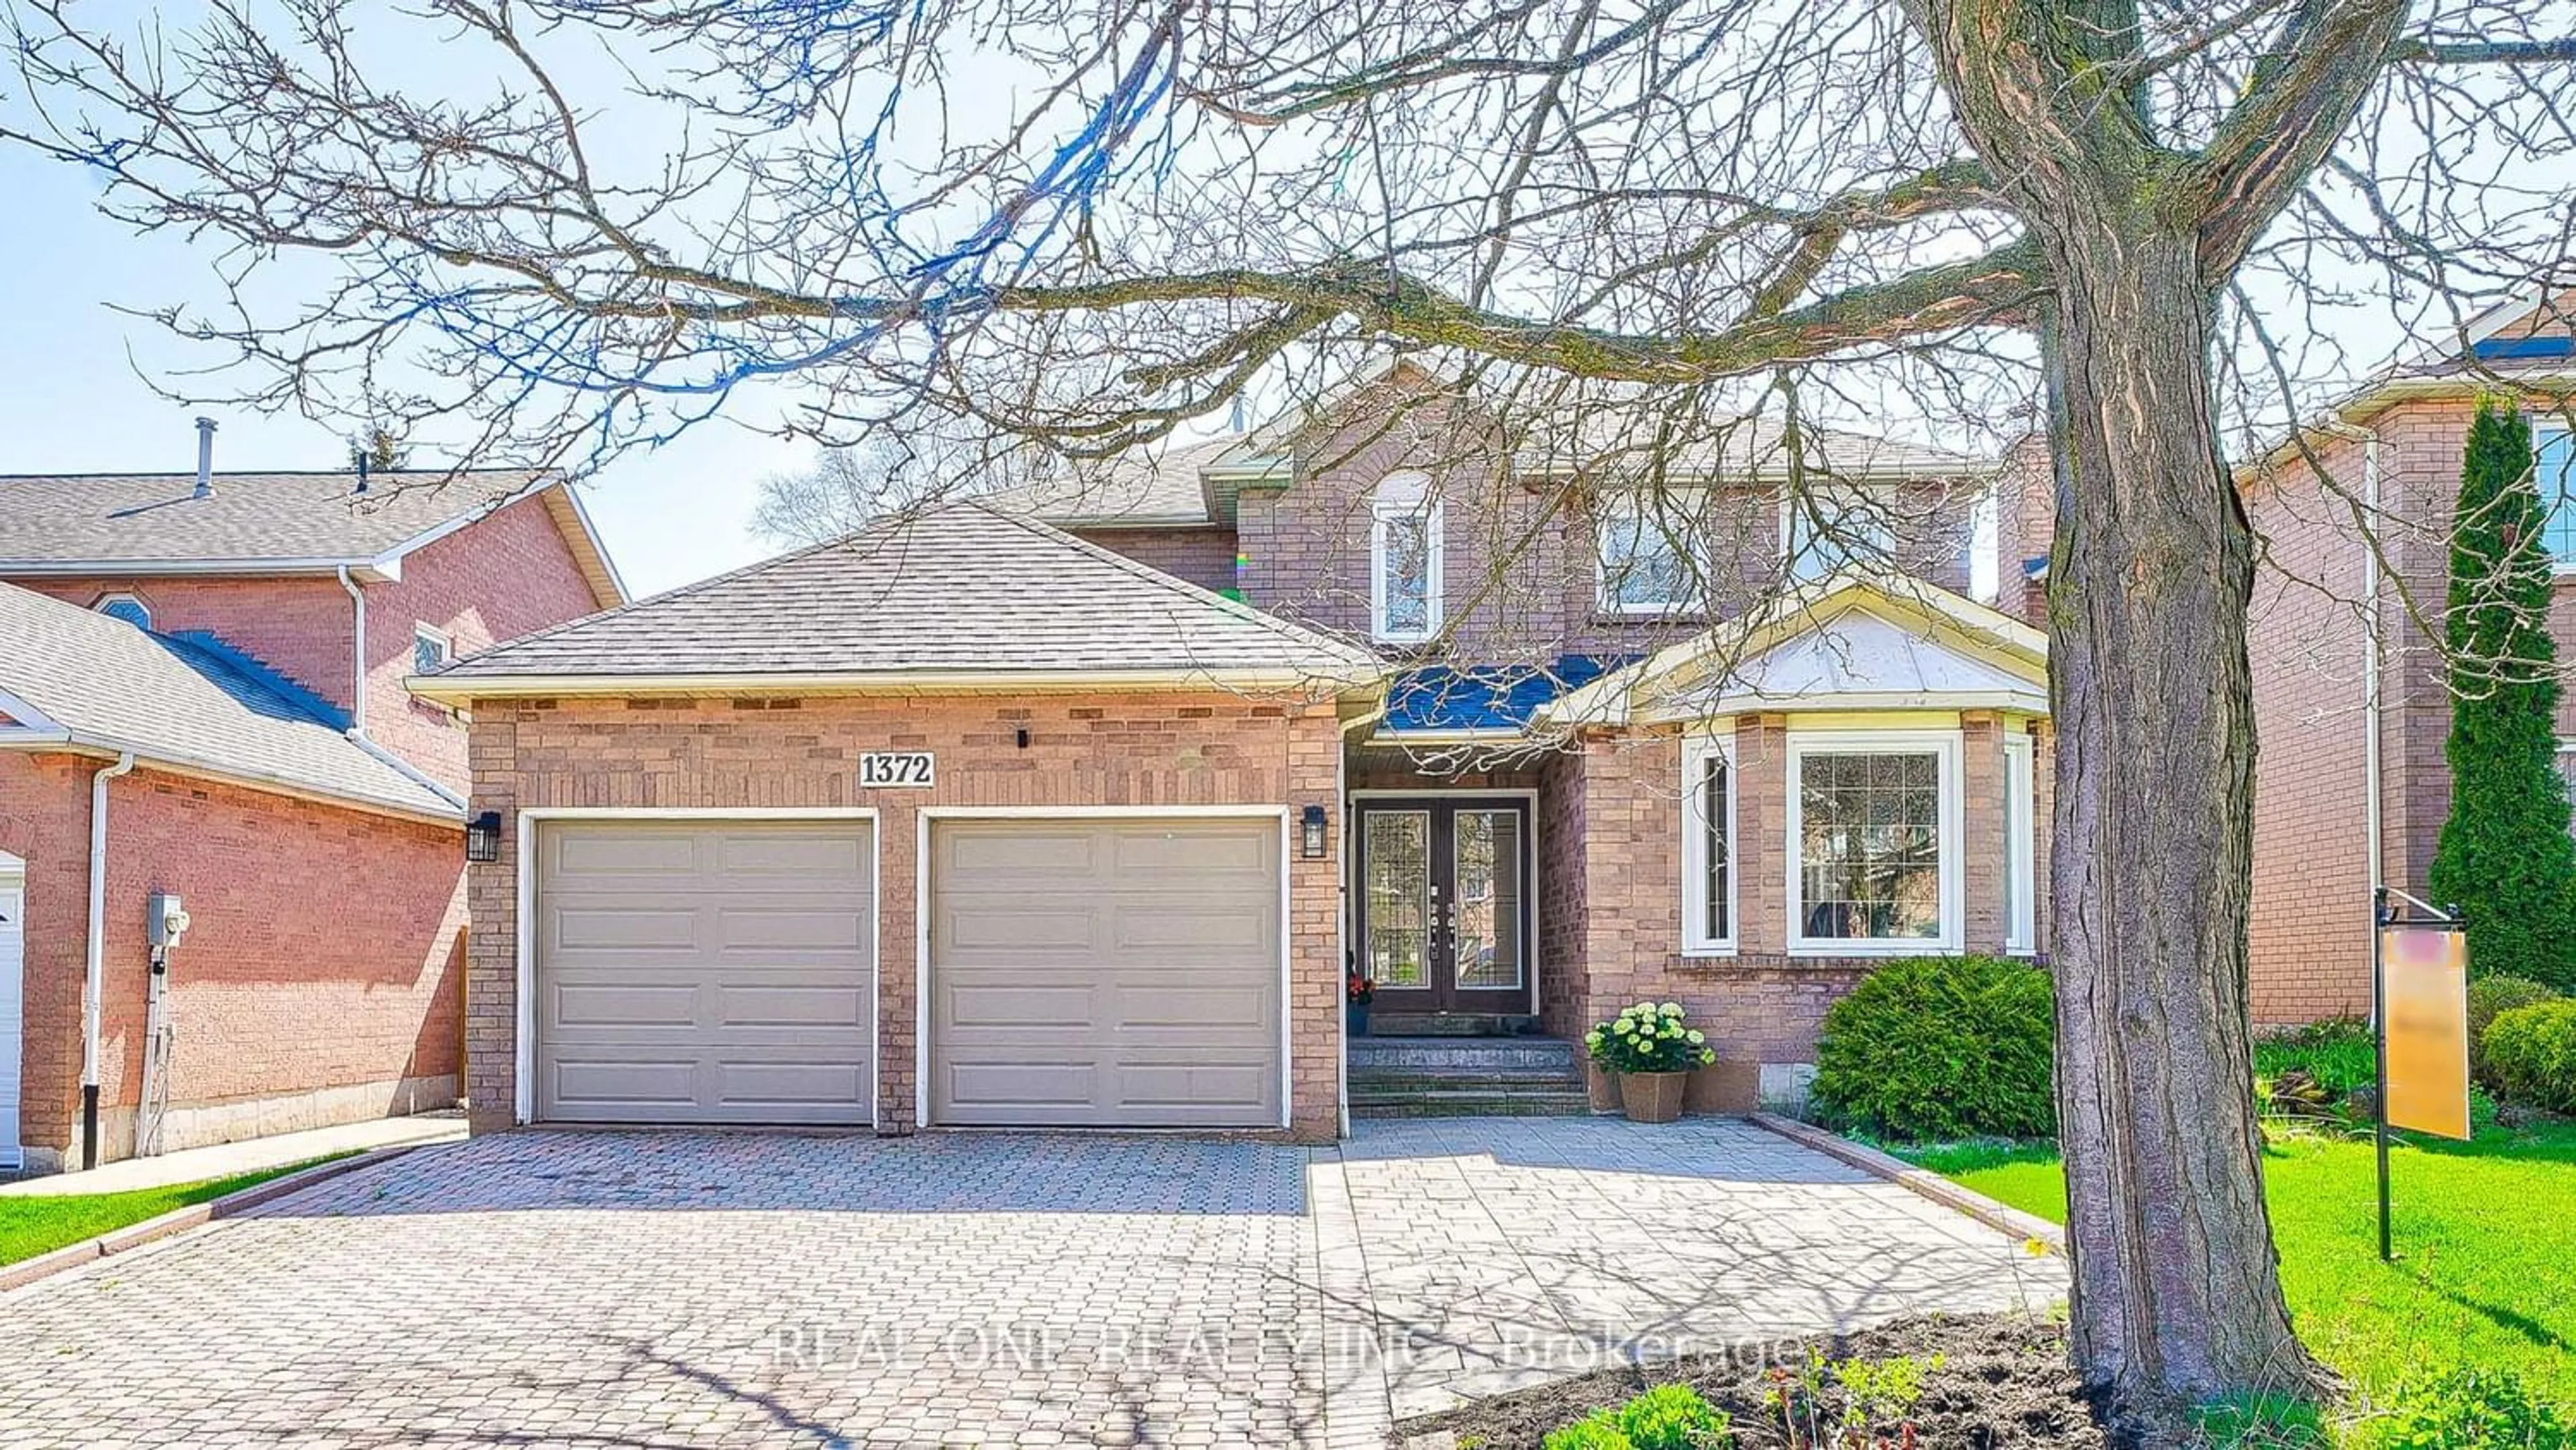 Home with brick exterior material for 1372 Eddie Shain Dr, Oakville Ontario L6J 7C7